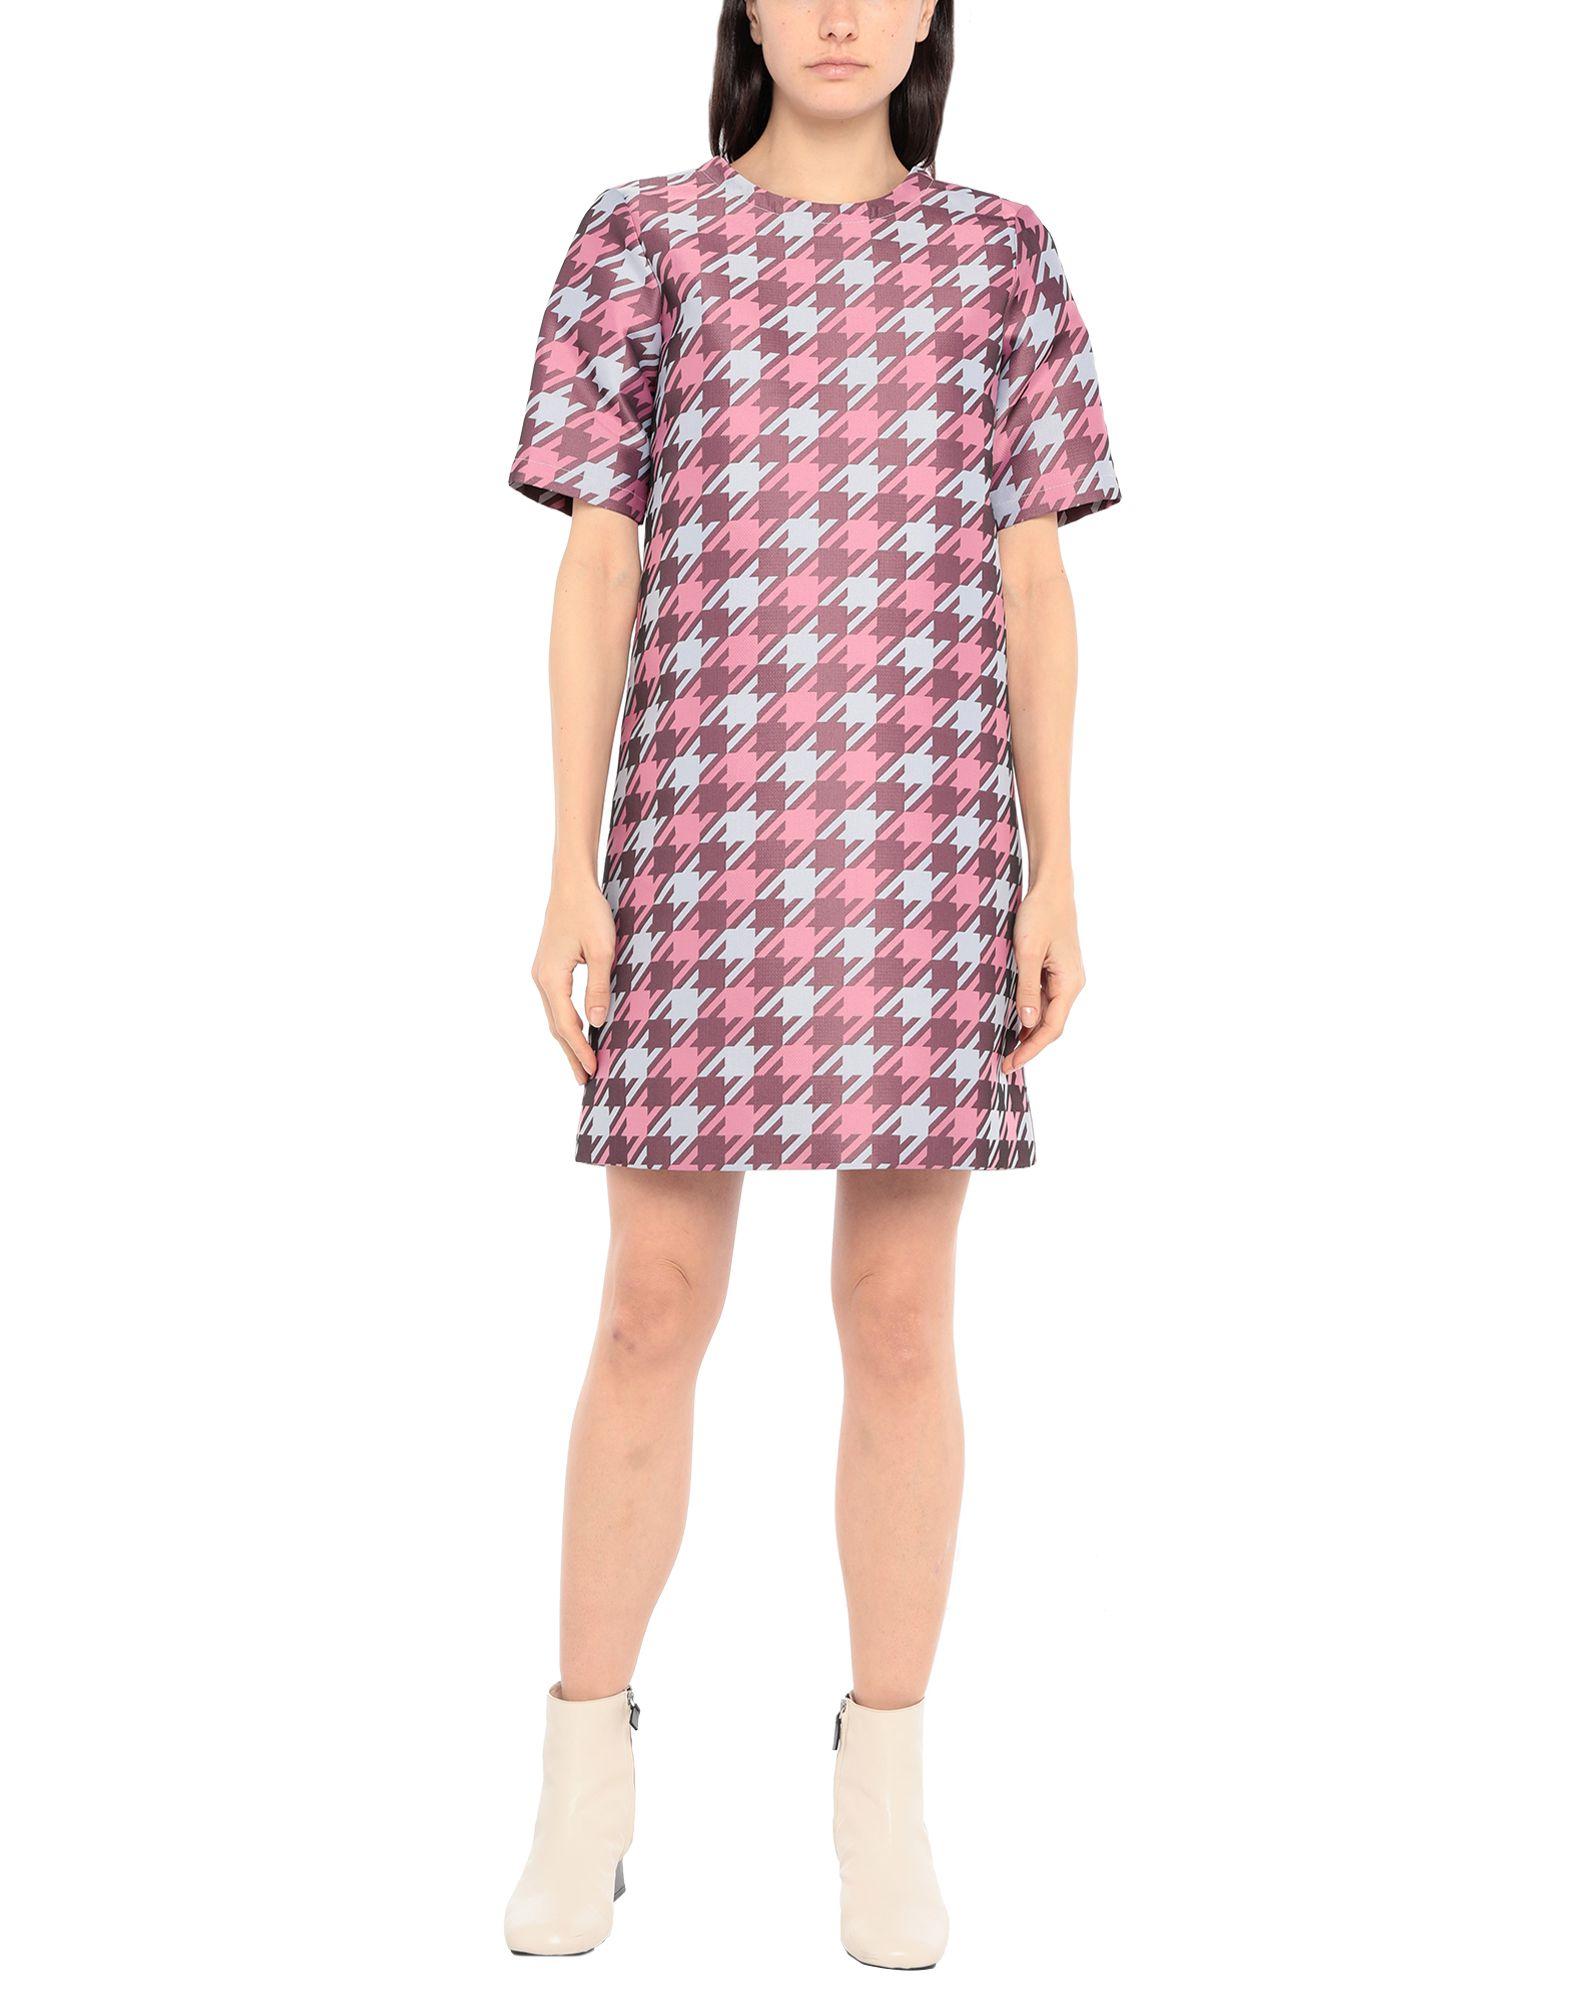 Marni Synthetic Short Dress in Pink - Lyst